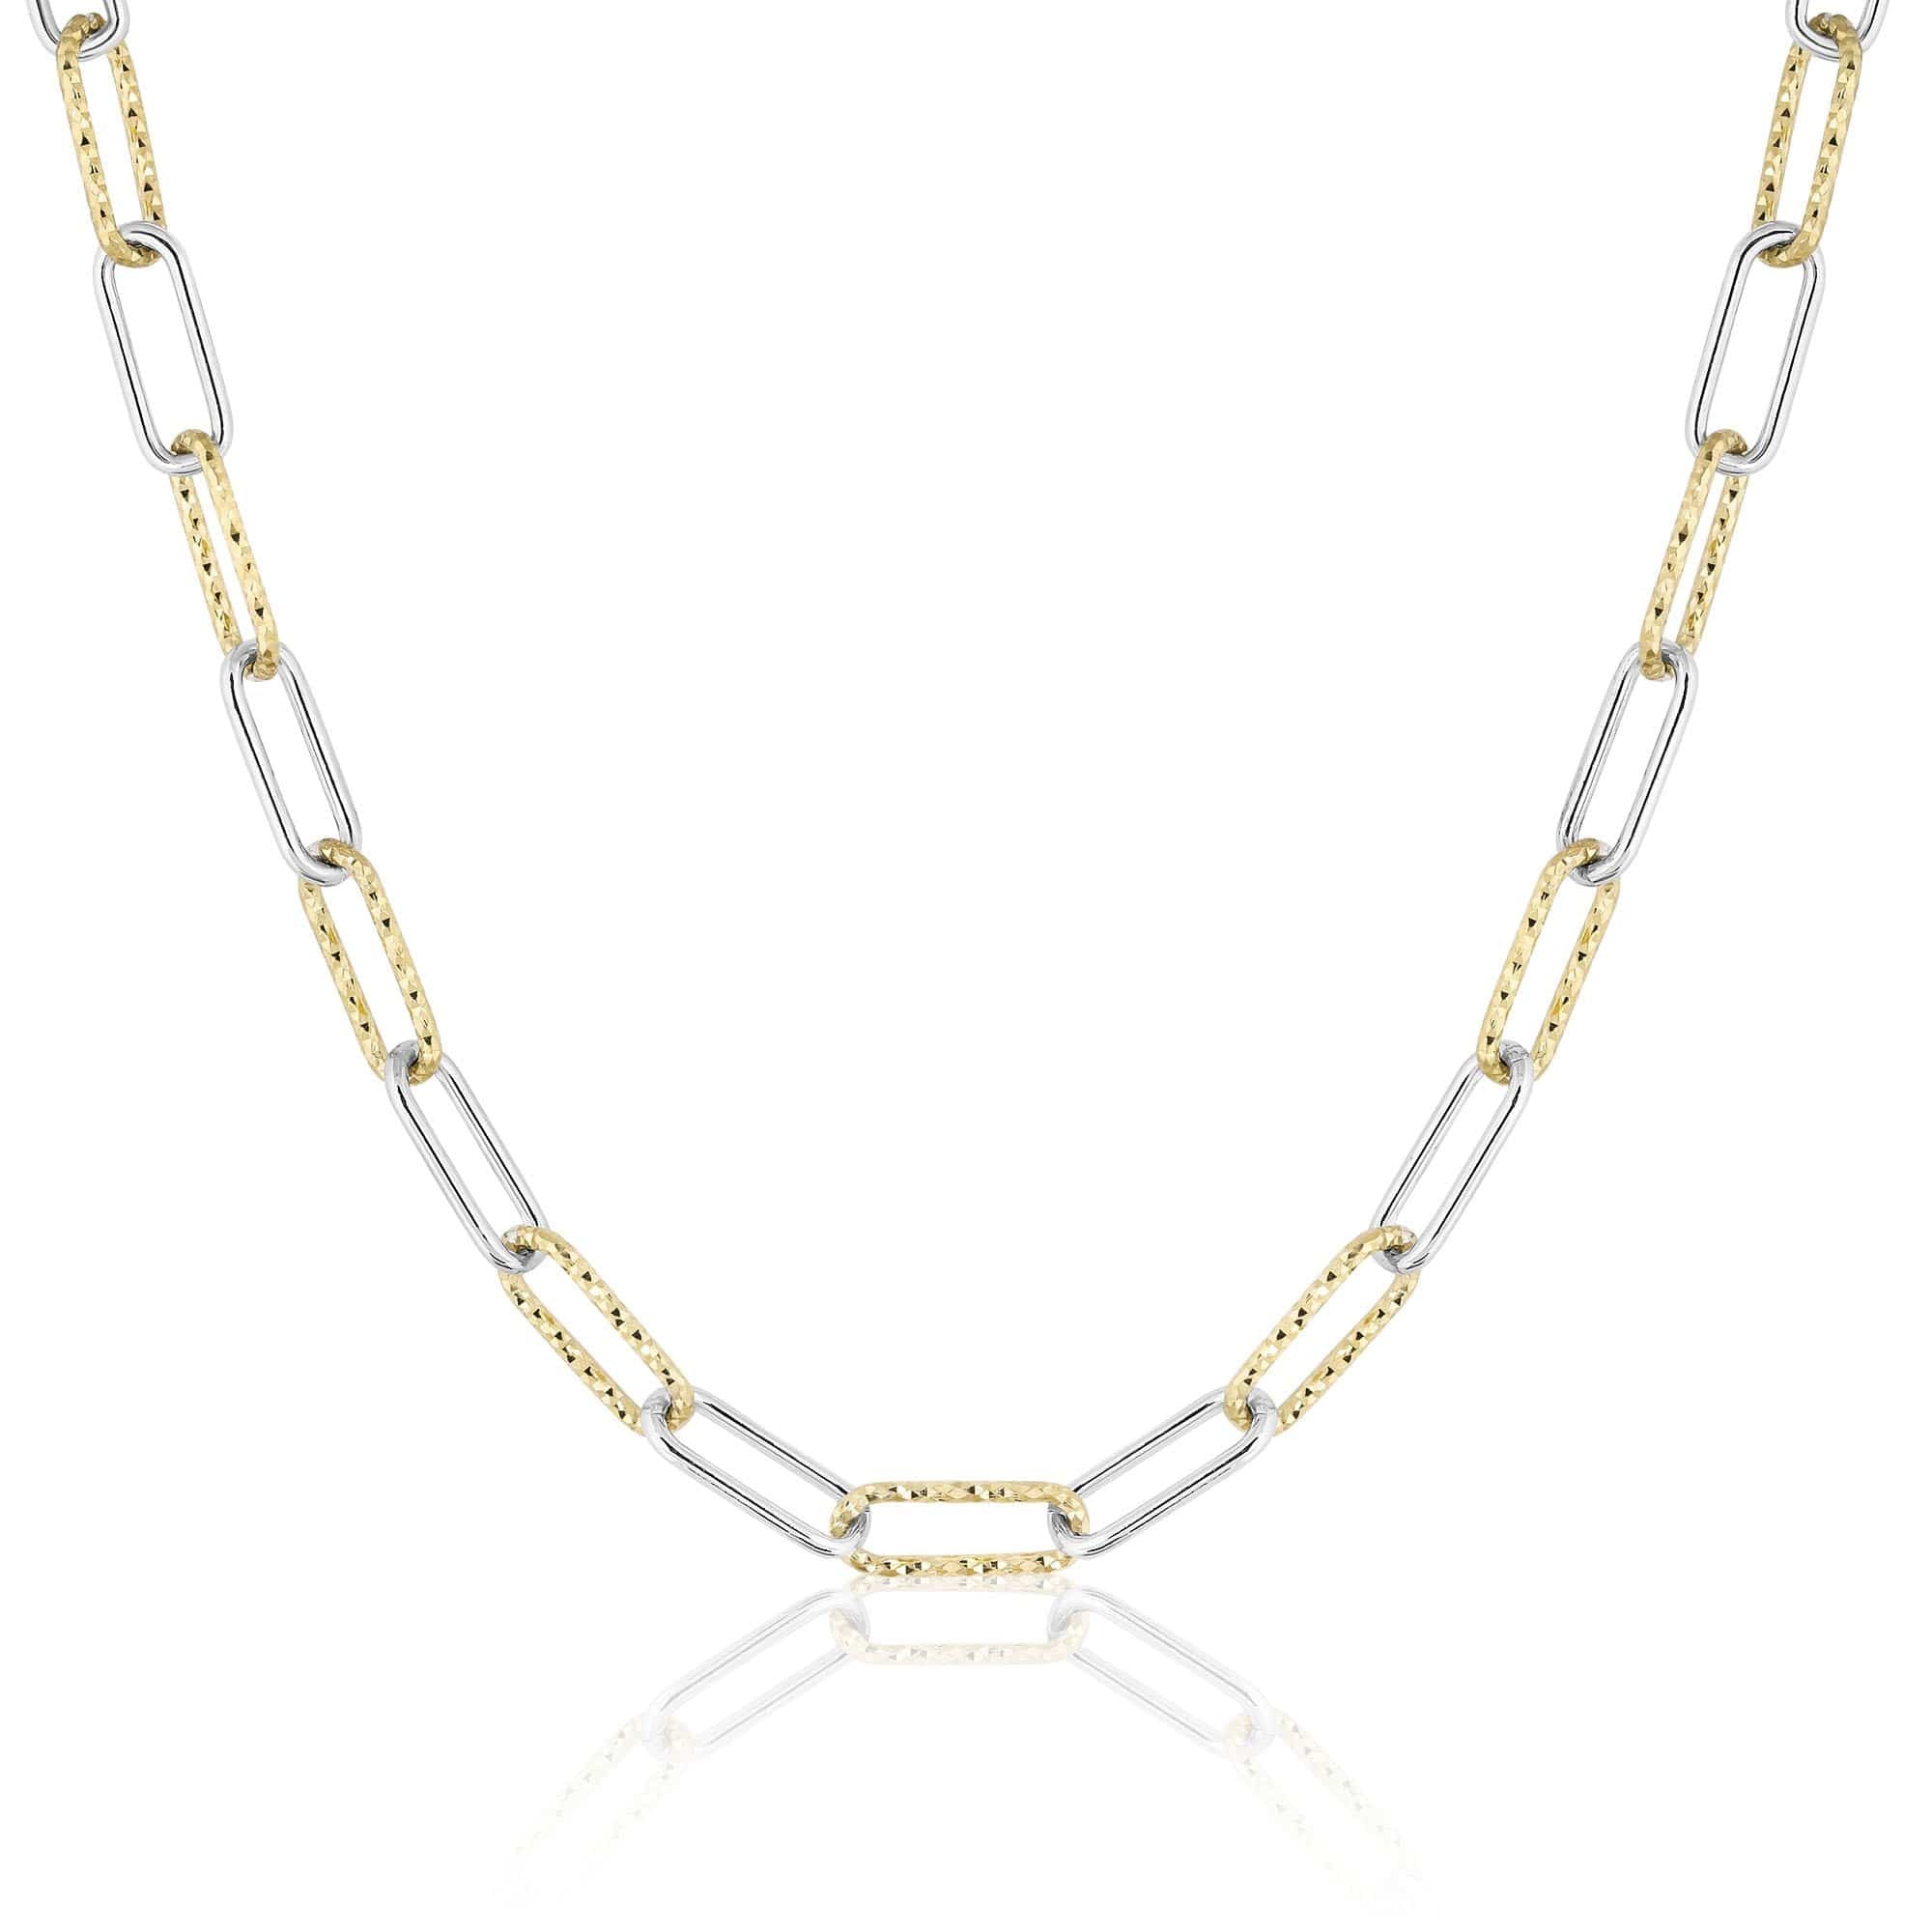 ela rae helena sparkle mix necklace 14k yellow gold plate sterling silver small